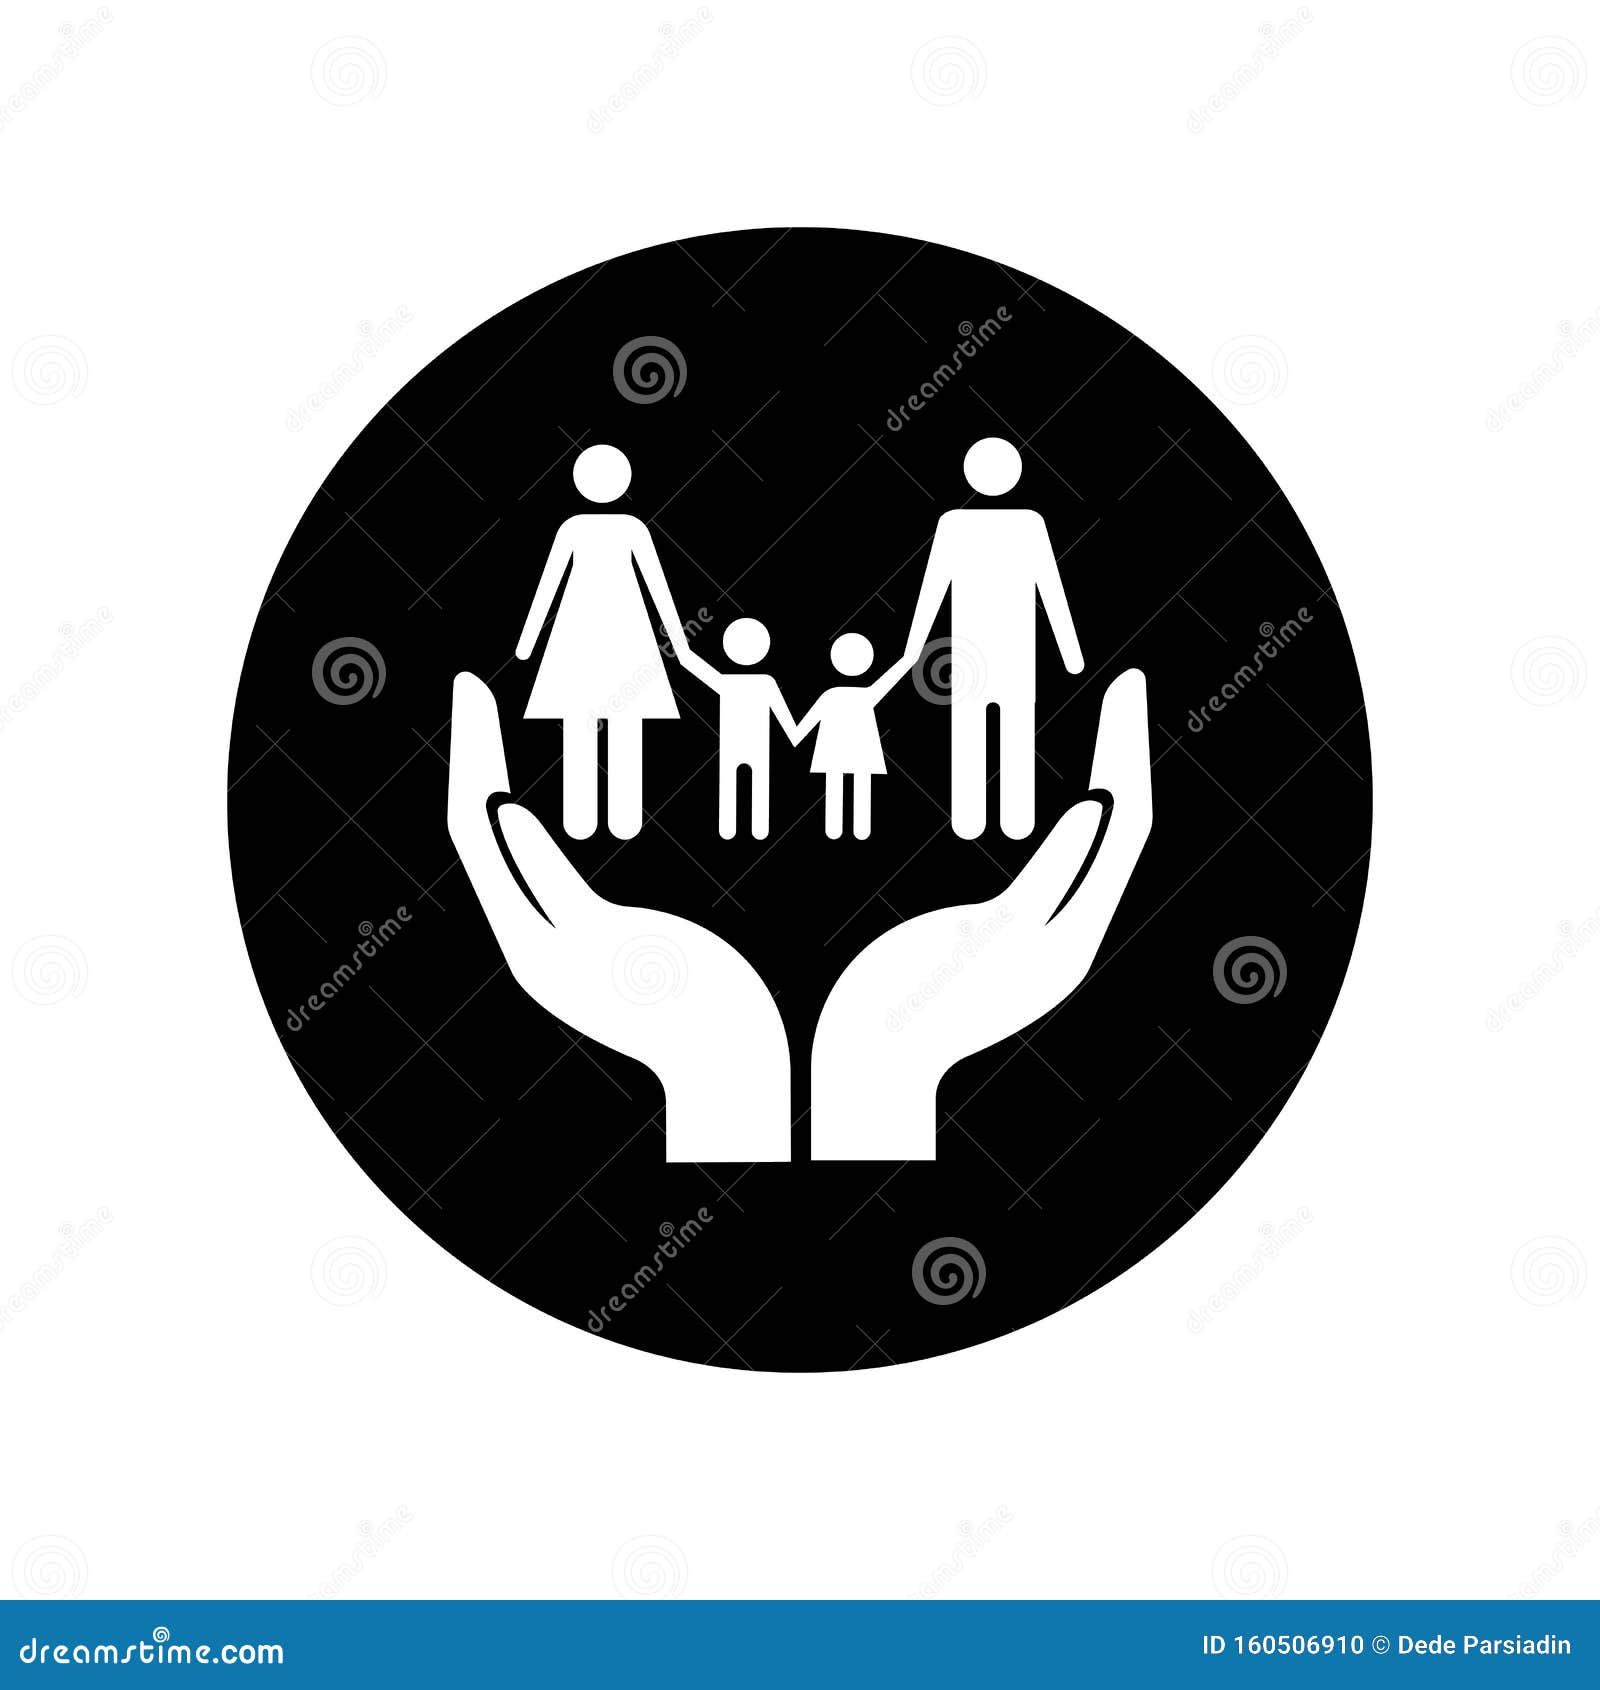 Family stock vector. Illustration of parenting, graphic ...